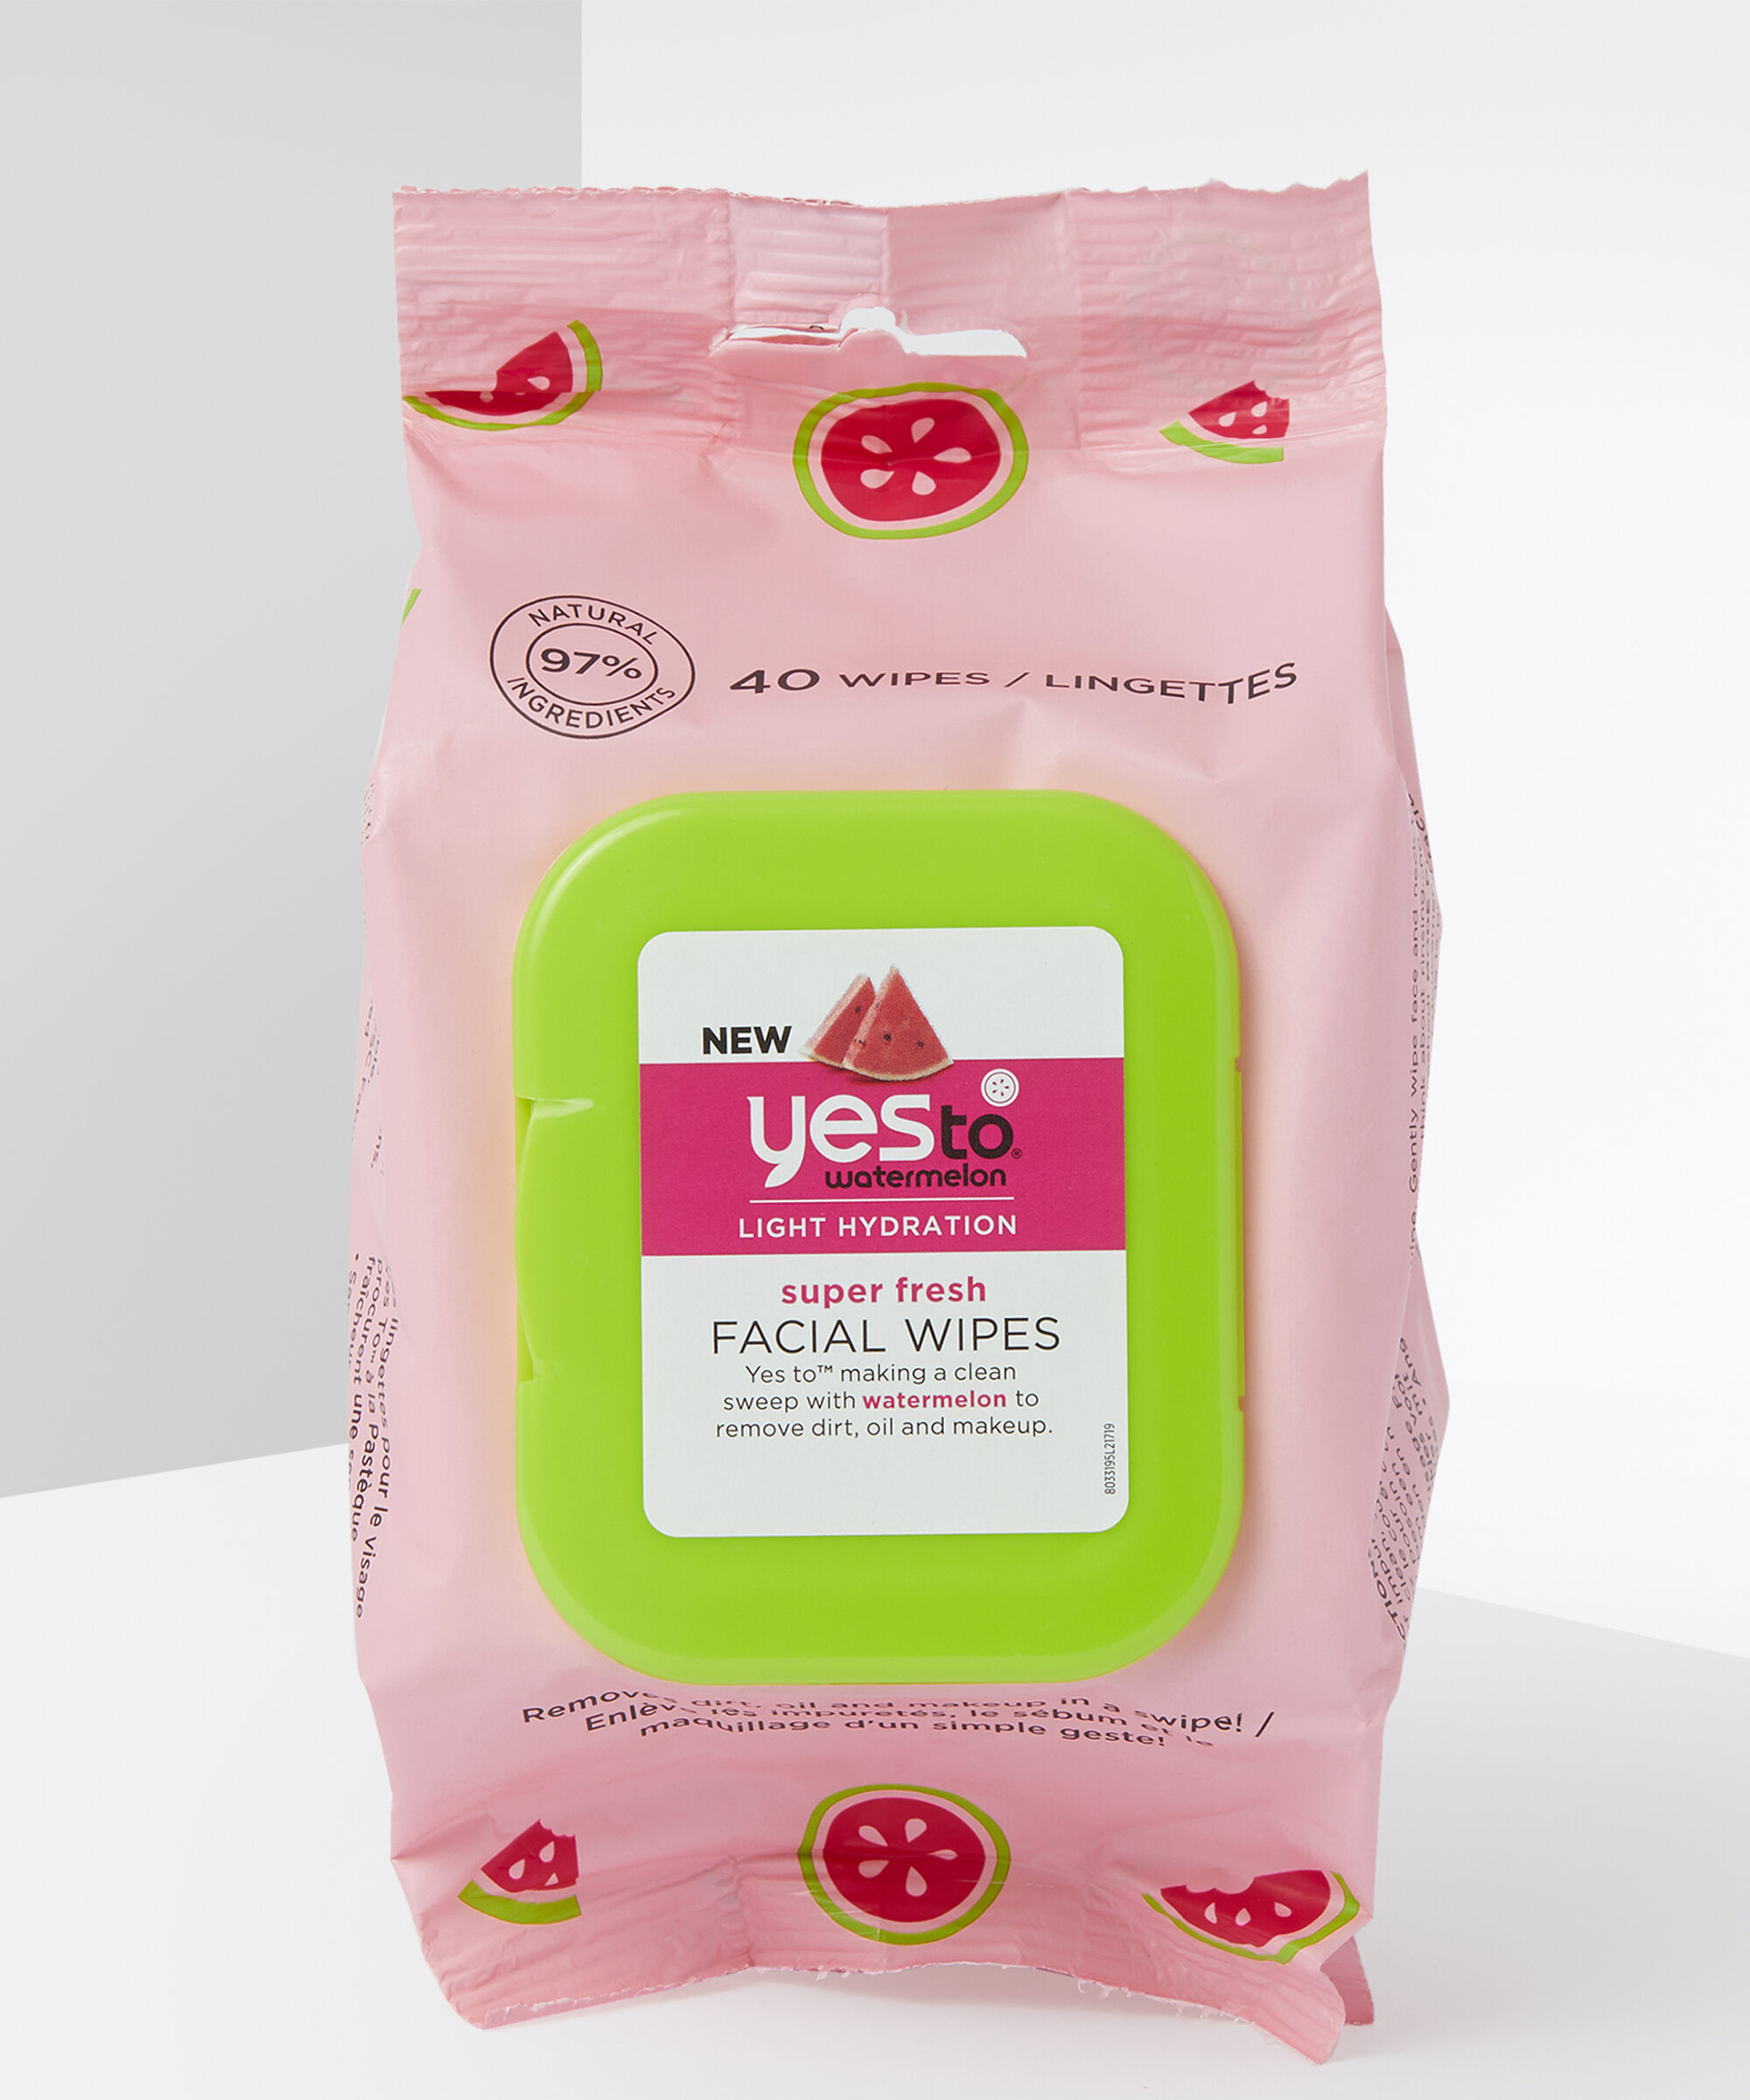 Yes to - Watermelon Super Fresh Facial Wipes